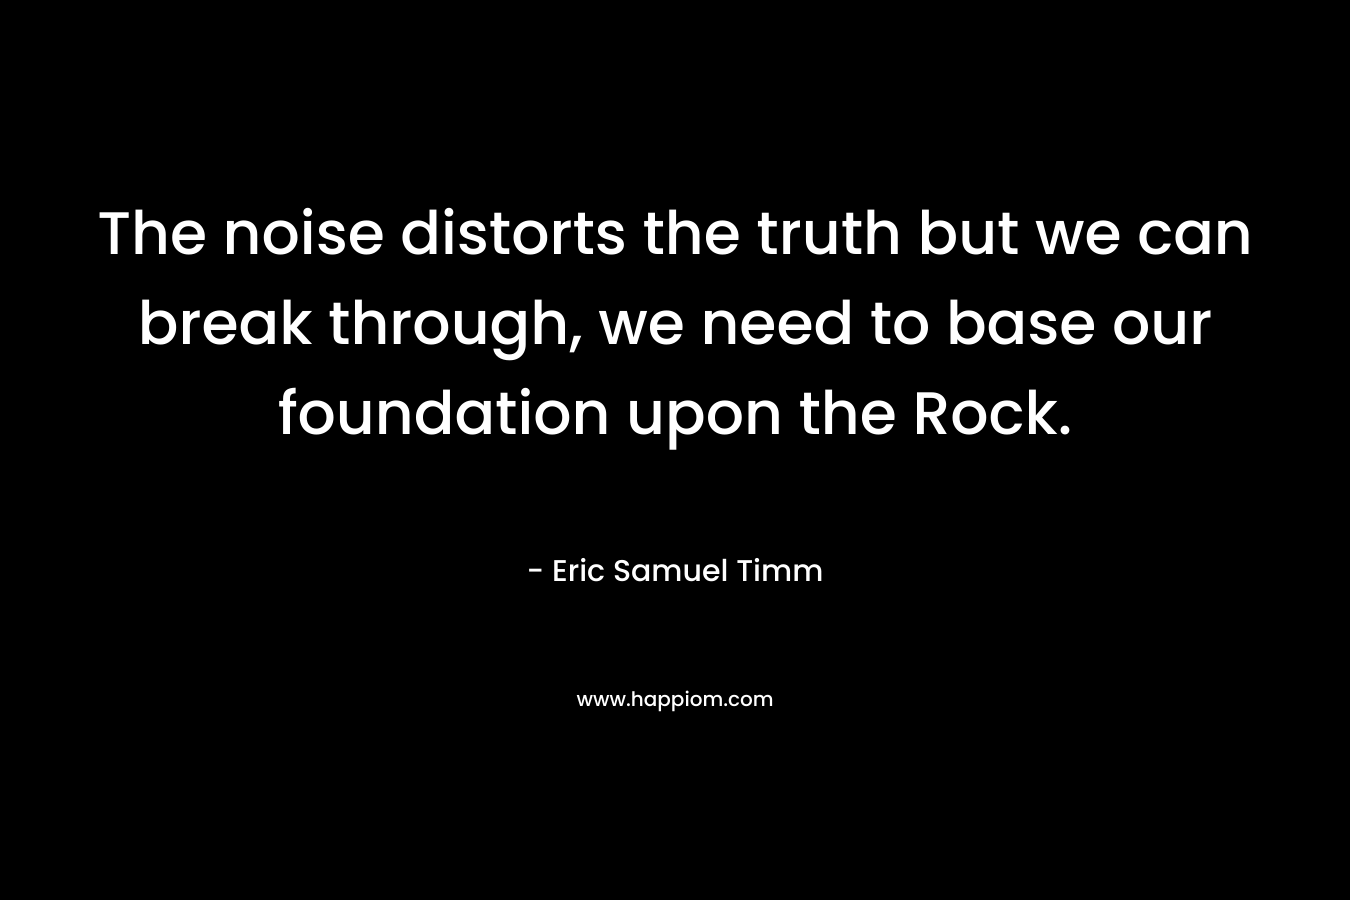 The noise distorts the truth but we can break through, we need to base our foundation upon the Rock. – Eric Samuel Timm